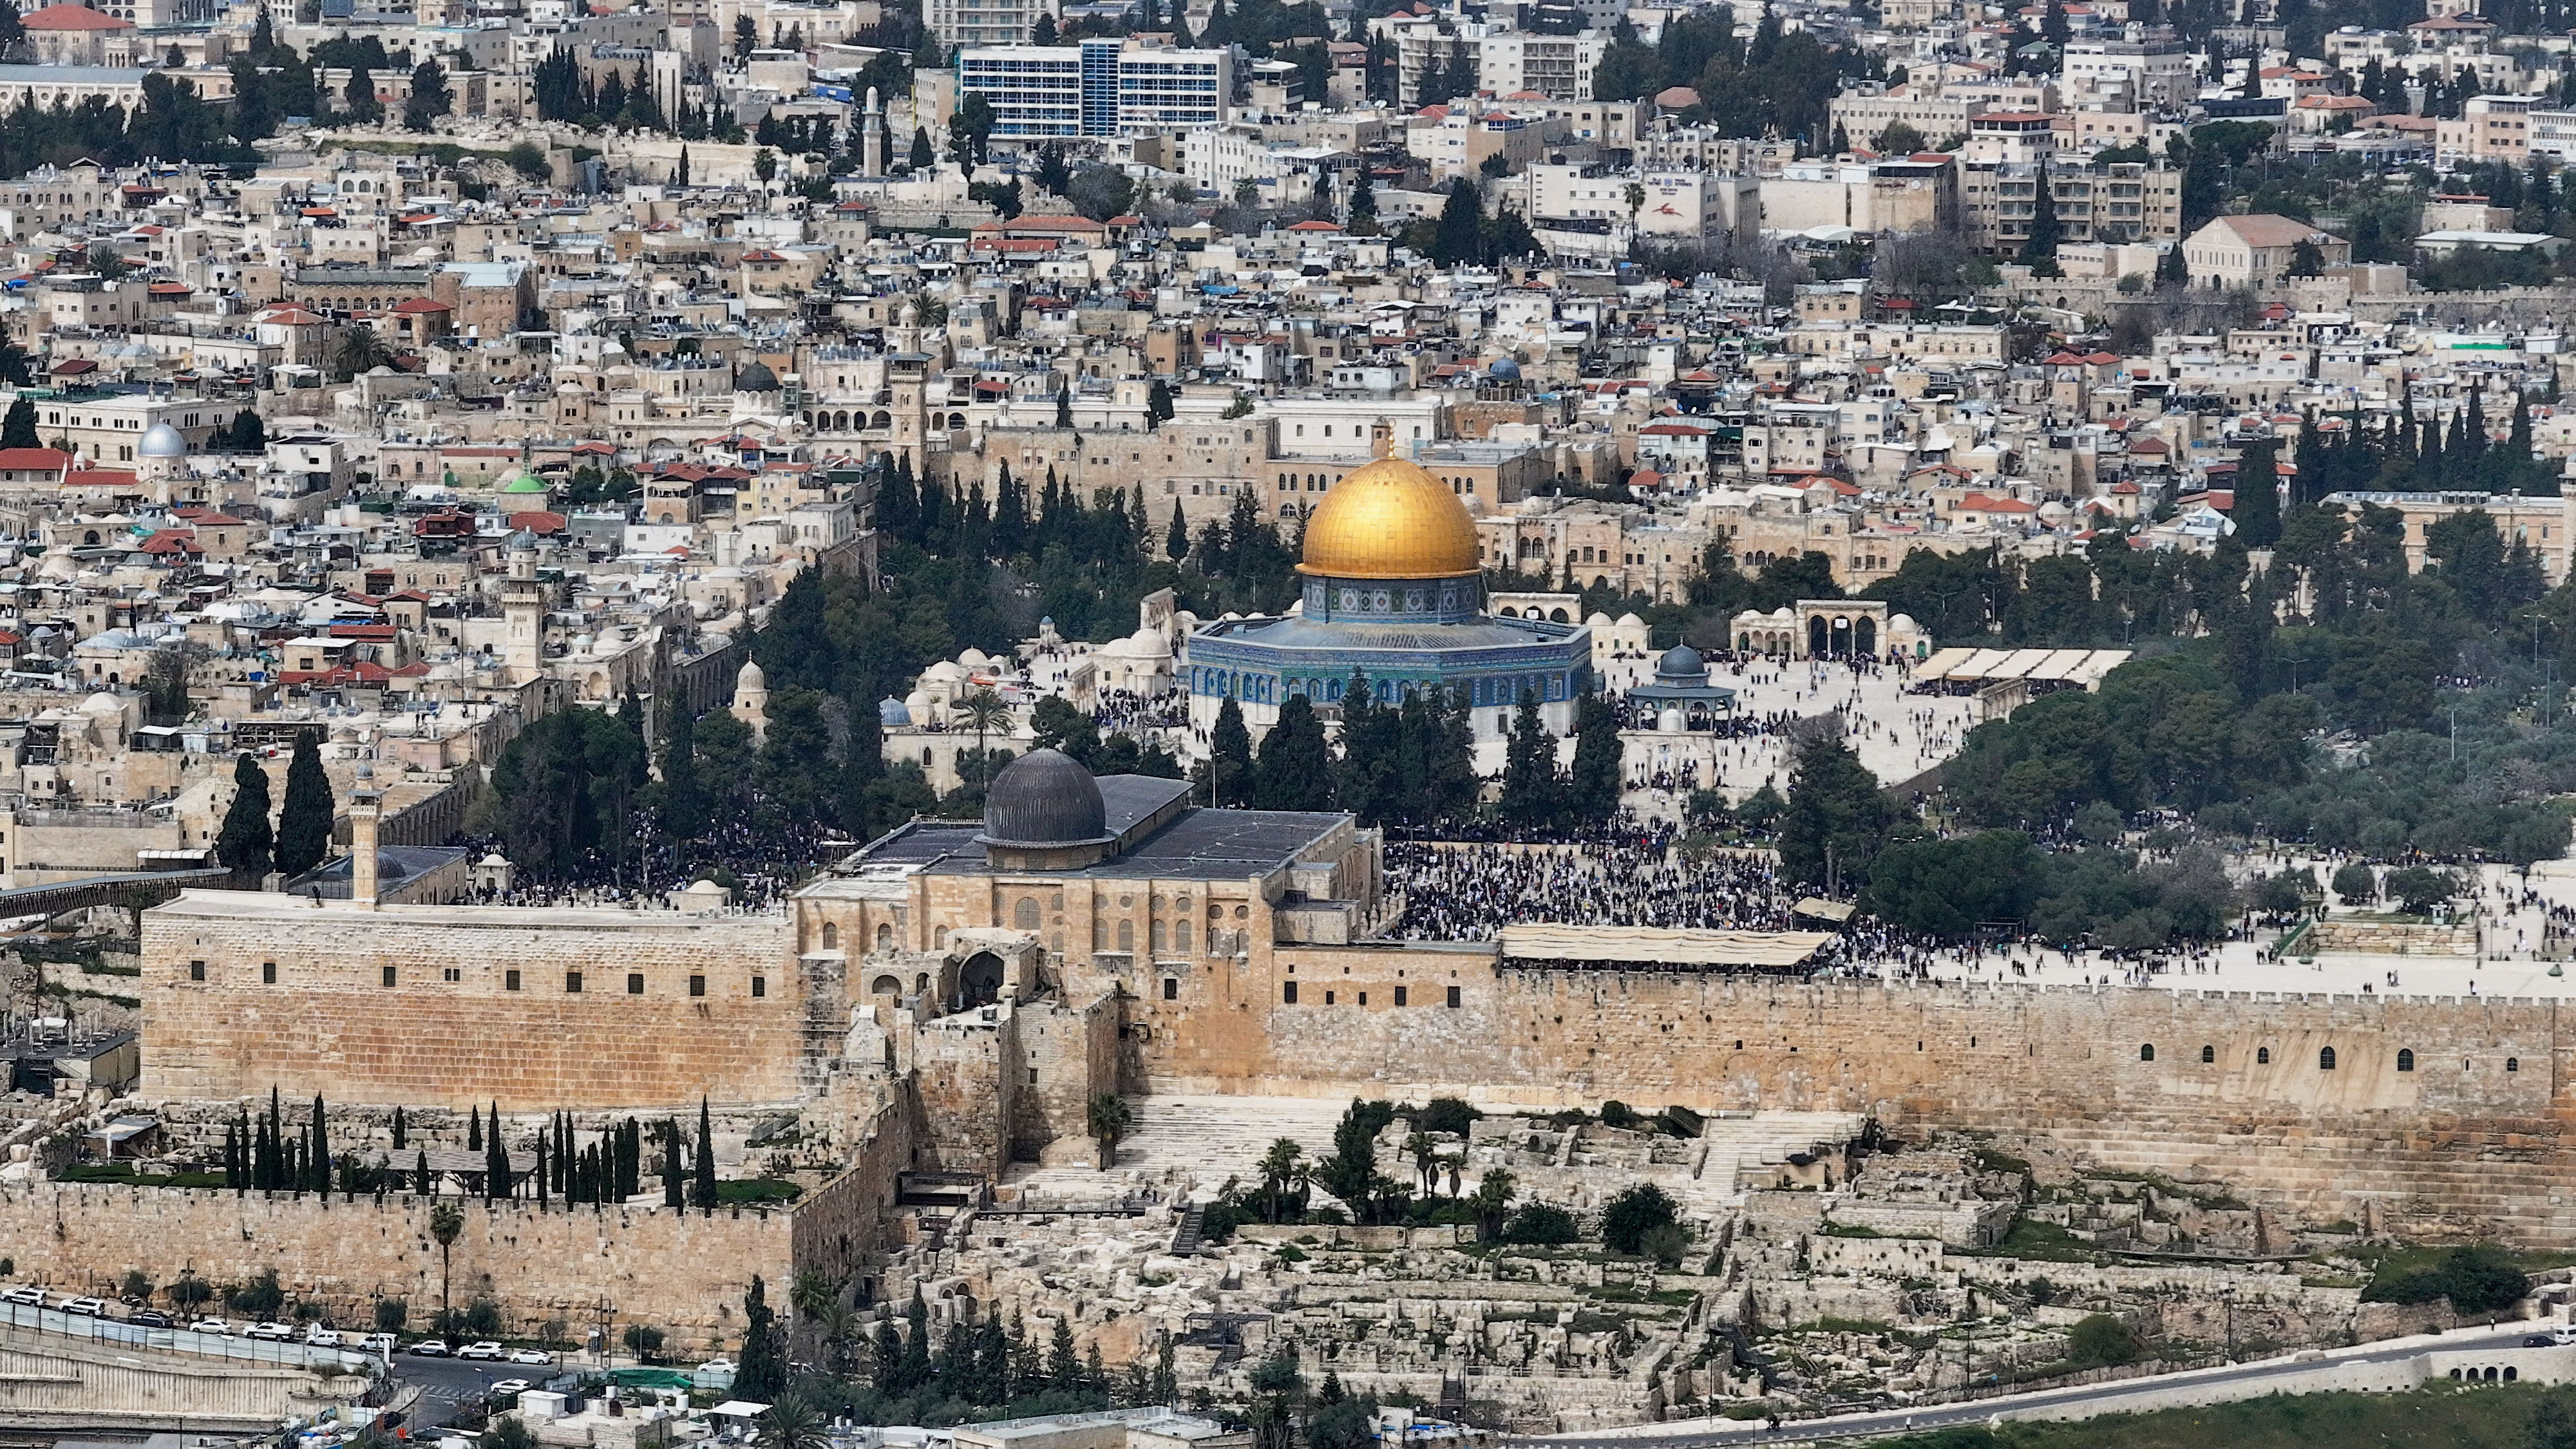 A drone view shows the Dome of the Rock on the al-Aqsa mosque compound, also known as the Temple Mount by Jews, in Jerusalem's Old City on March 29.